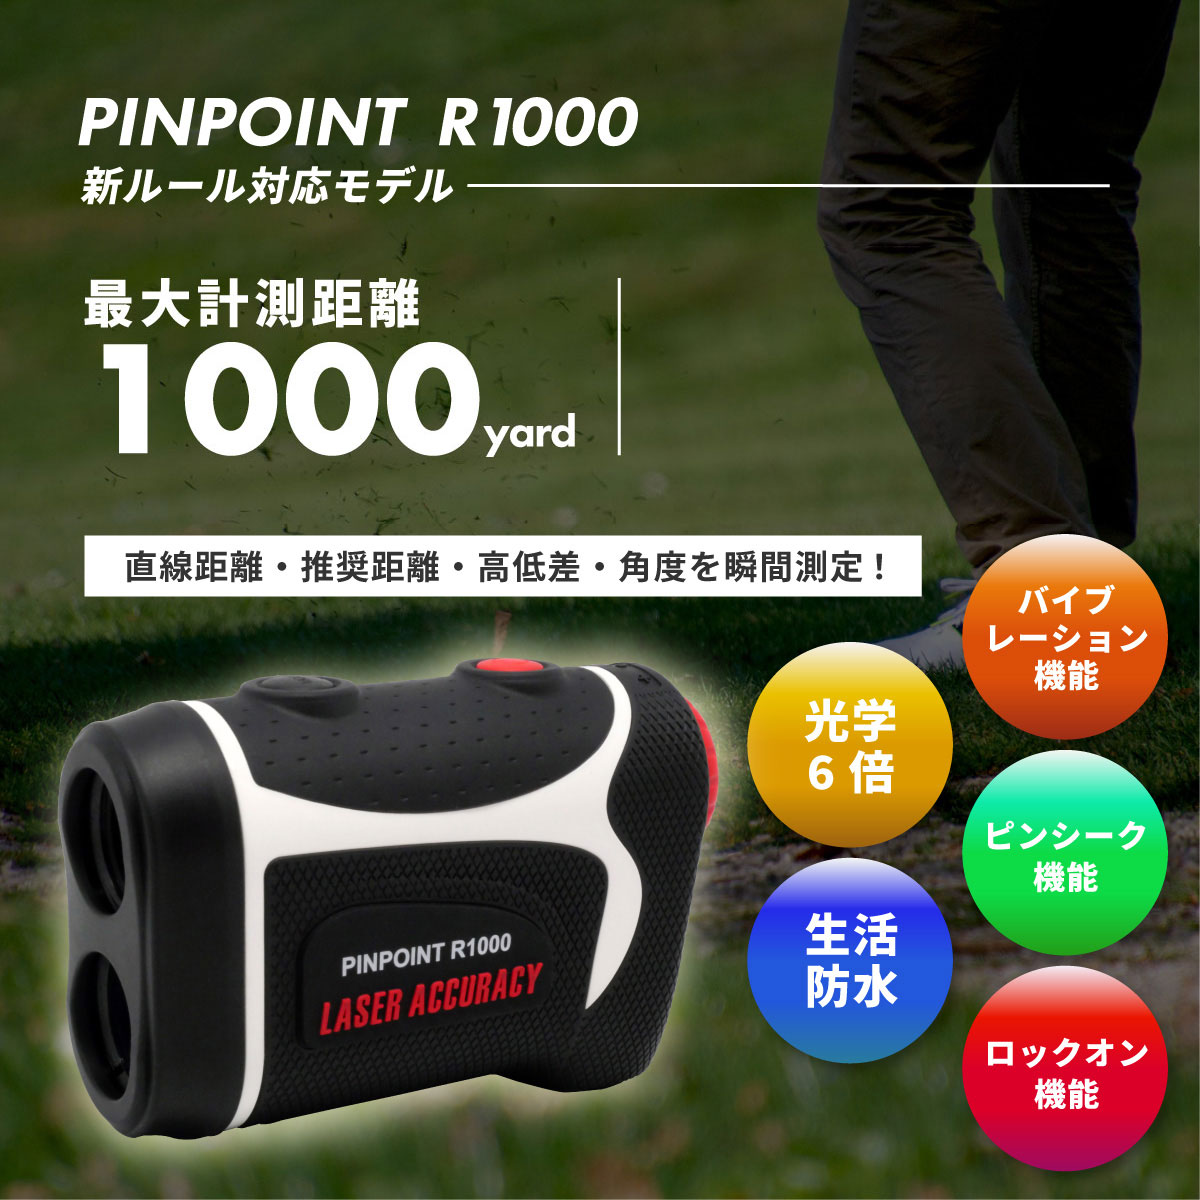 [U[ LASER ACCURACY PINPOINT R1000